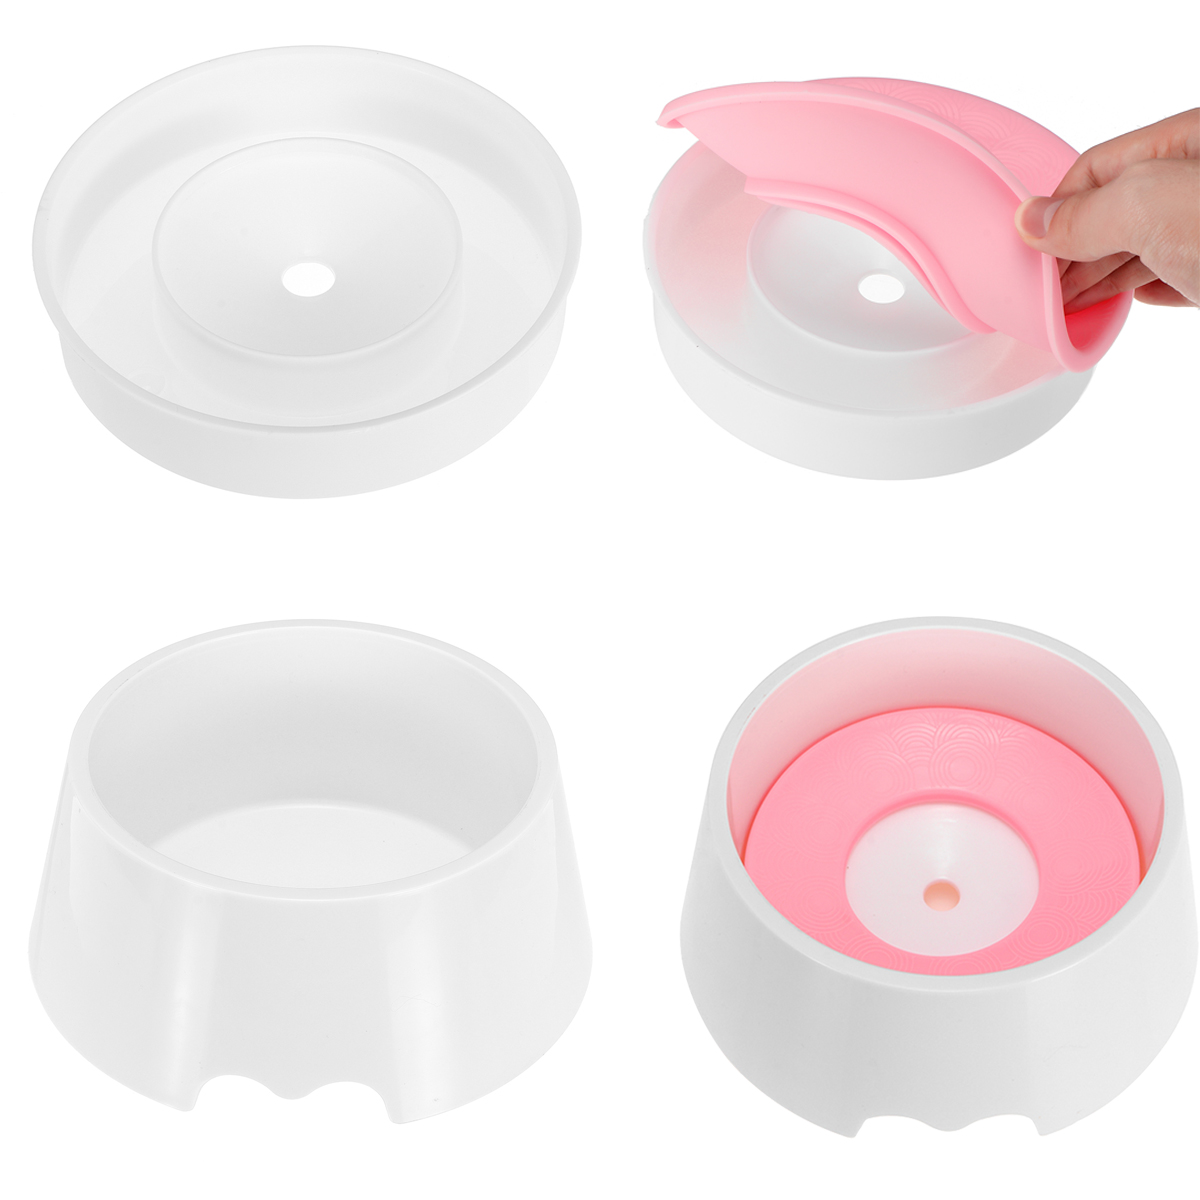 No-Wet-Mouth-and-Splash-Proof-Pet-Feeding-Puppy-Travel-Animal-Water-Bowl-1439667-9